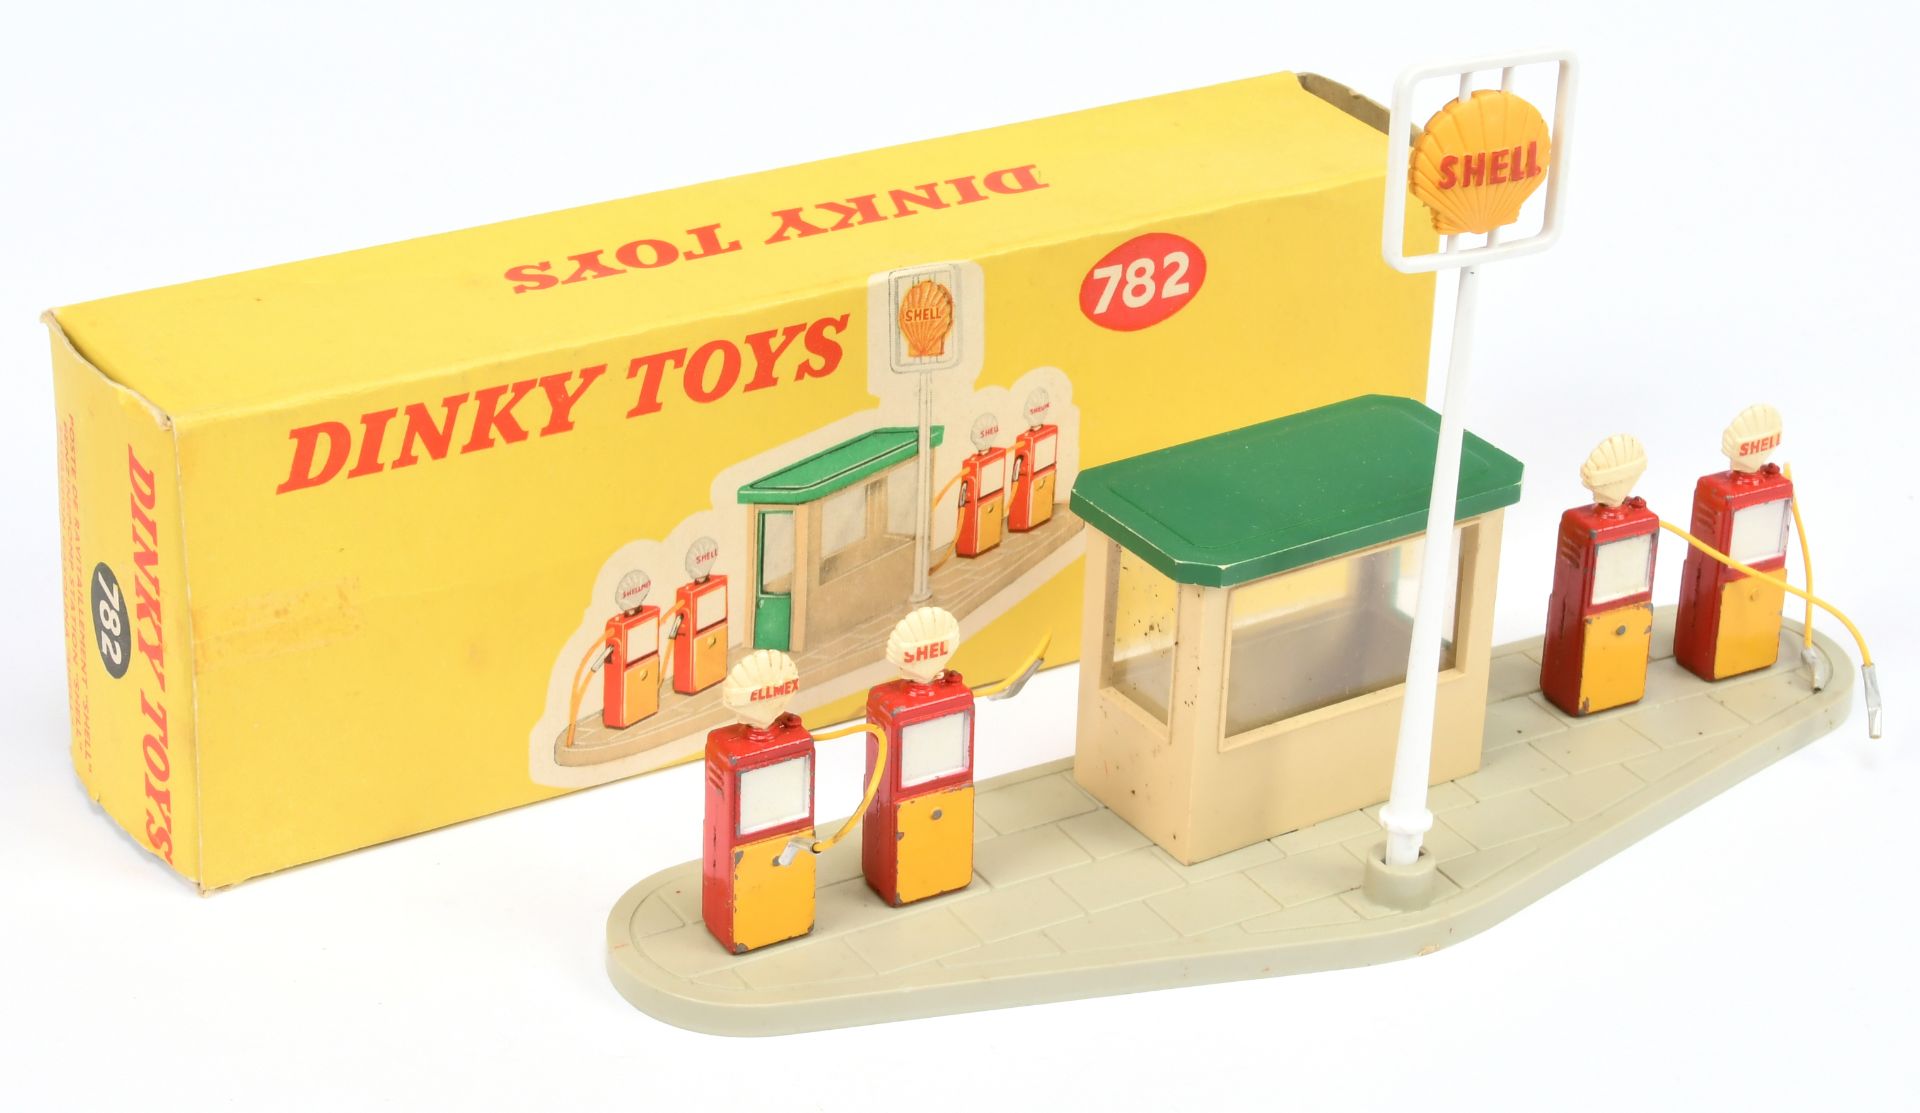 Dinky Toys 782 "SHELL" Petrol Pump Forecourt Set -Plastic base, hut and sign with 4 X metal pumps...